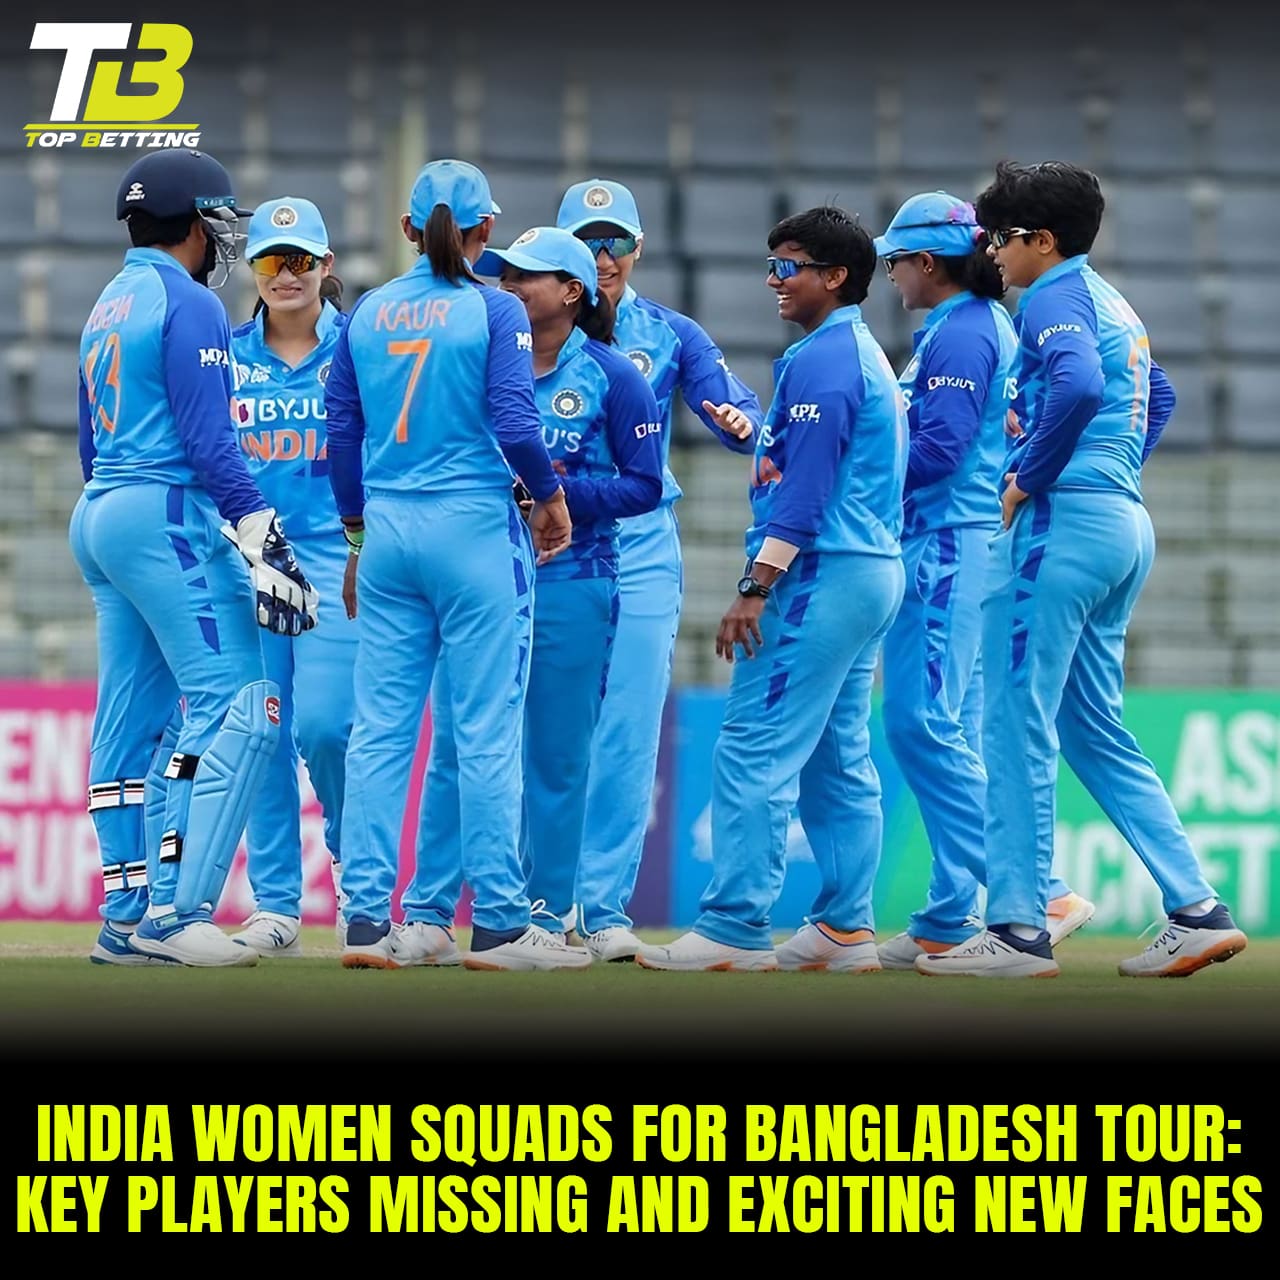 India Women Squads for Bangladesh Tour: Key Players Missing and Exciting New Faces: